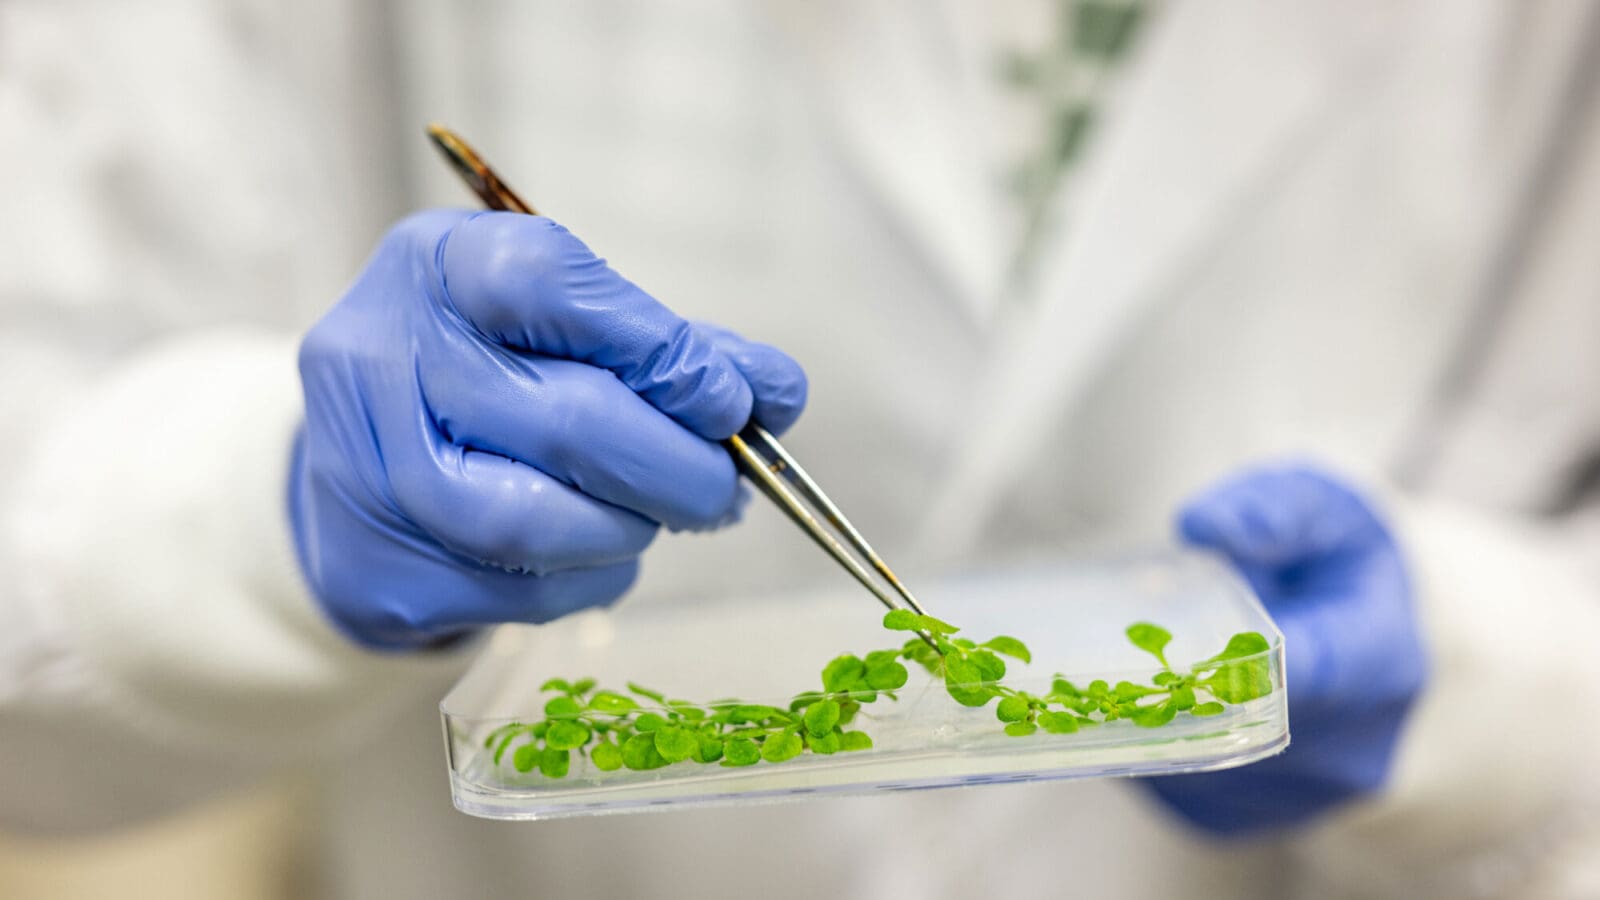 A person (face not visible) wearing a white lab coat and blue disposable gloves holds a square lab plate in their left hand. Their right hand holds a pair of tweezers which they are using to pick up one of several small green plants on the plate.